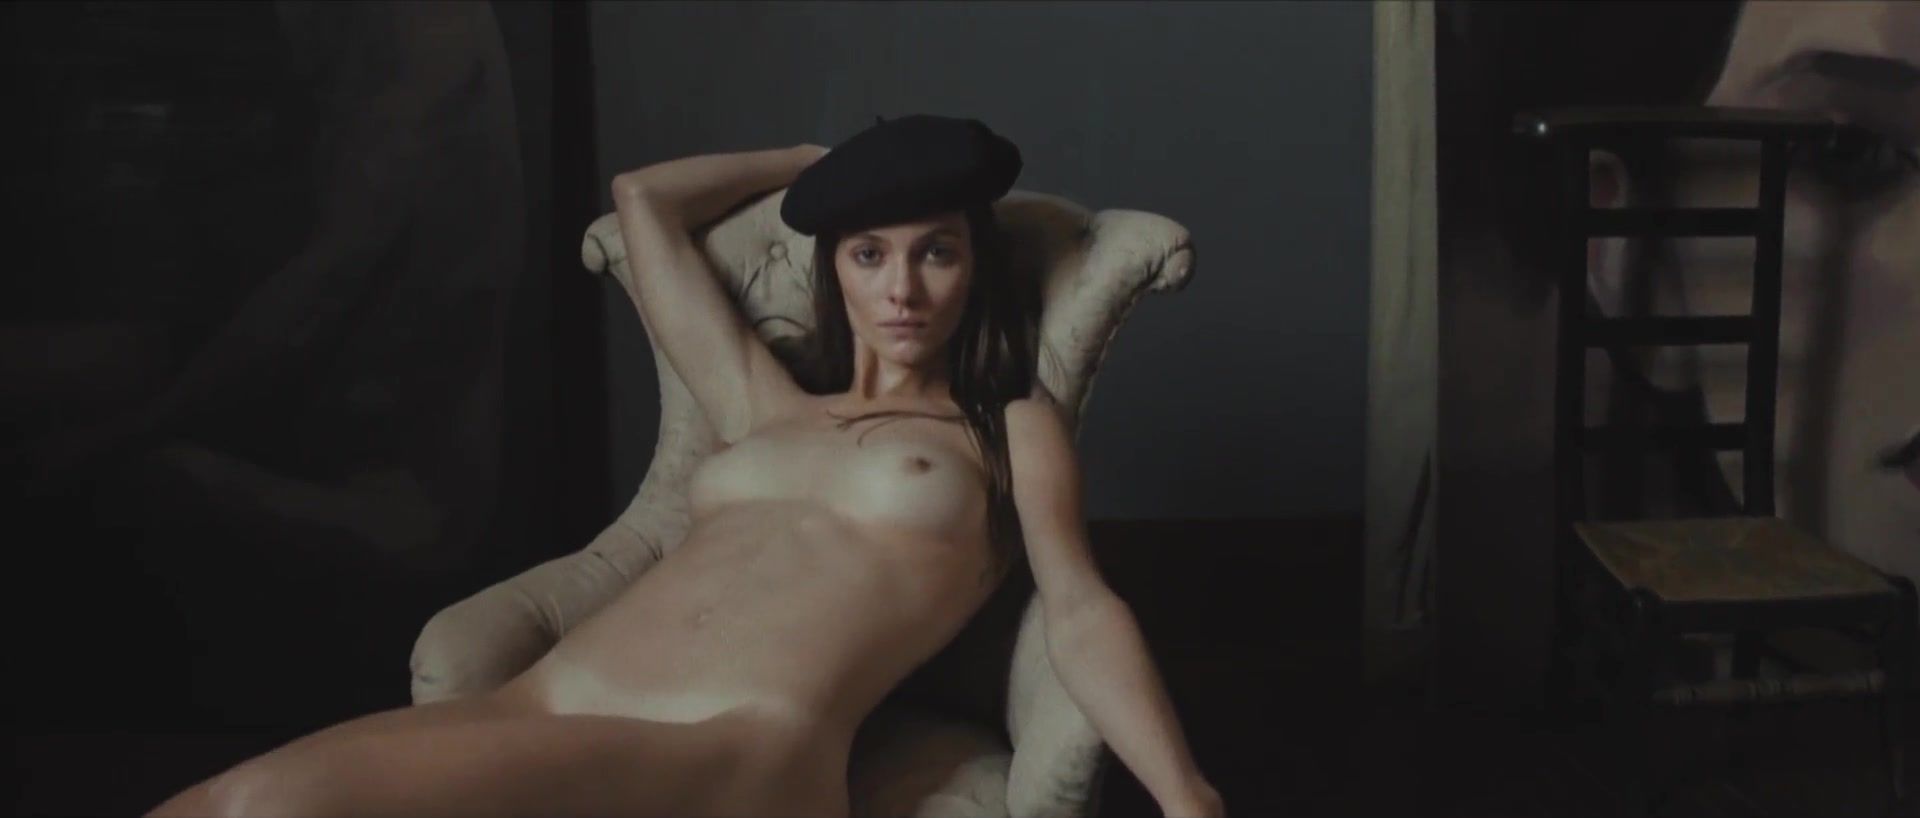 Sexy Art French Nudity Scene "La Fille d’Herode" Punished